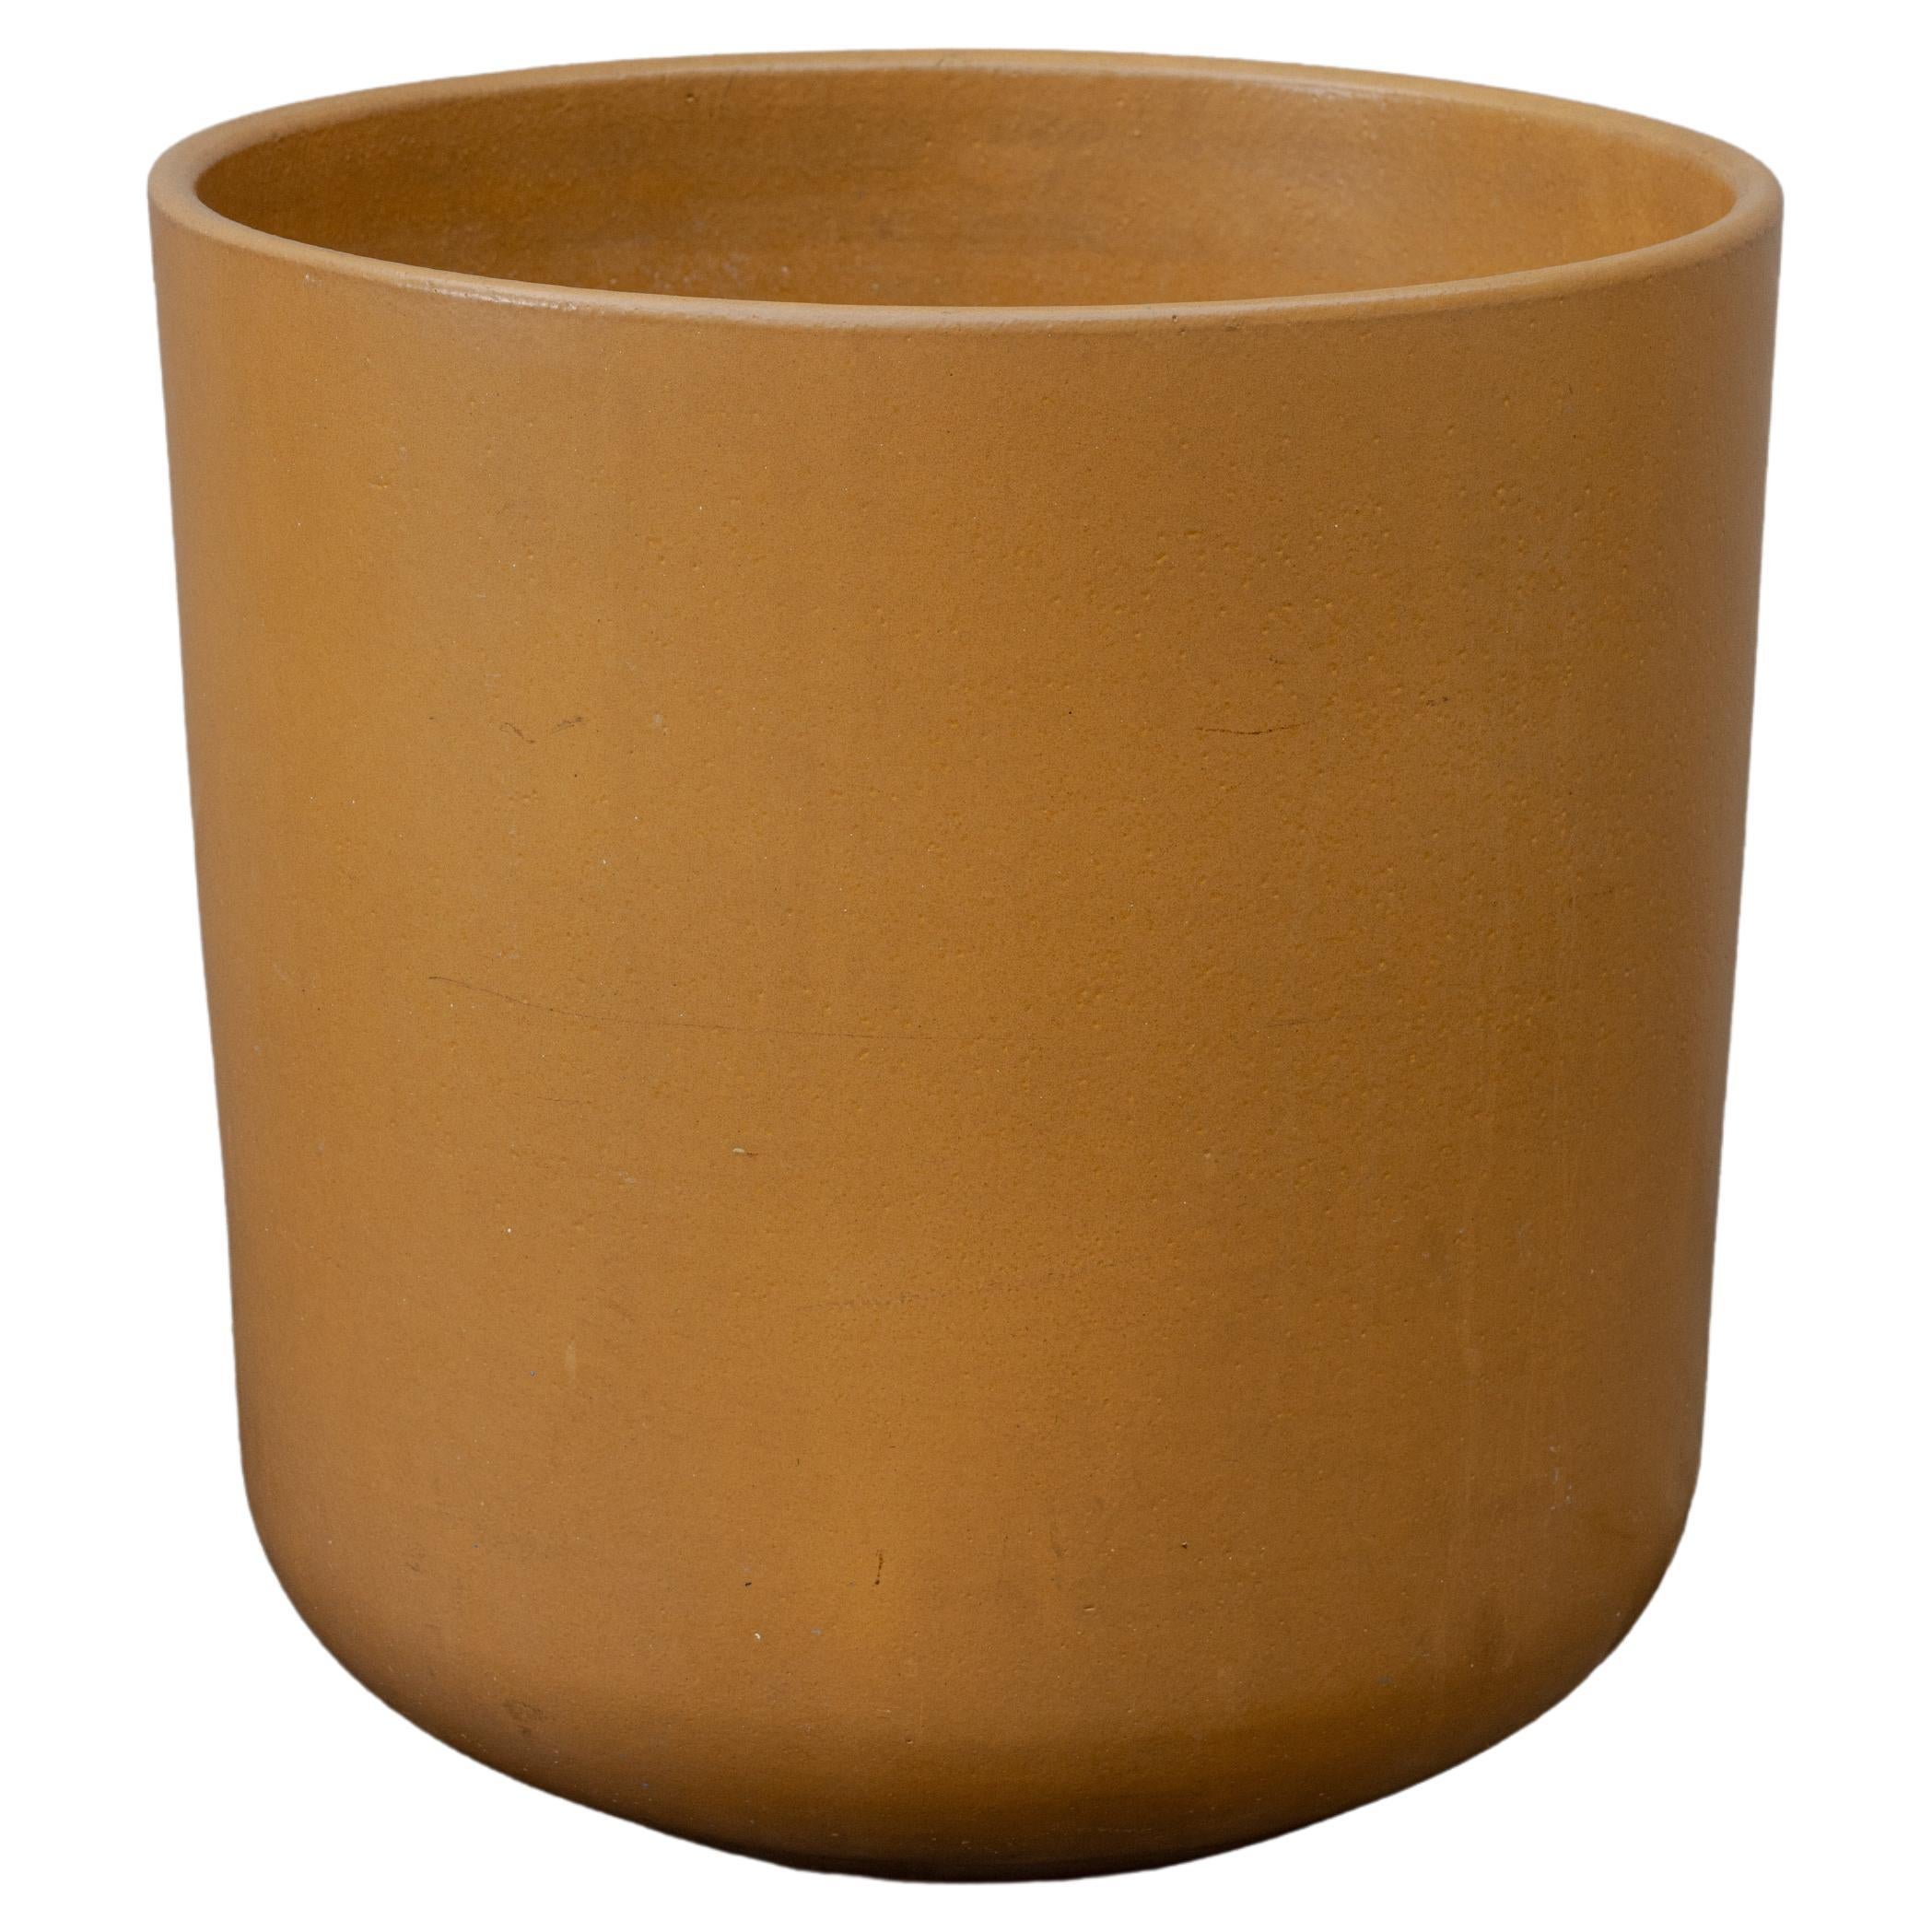 Model LT-15 Planter by Malcolm Leland for Architectural Pottery